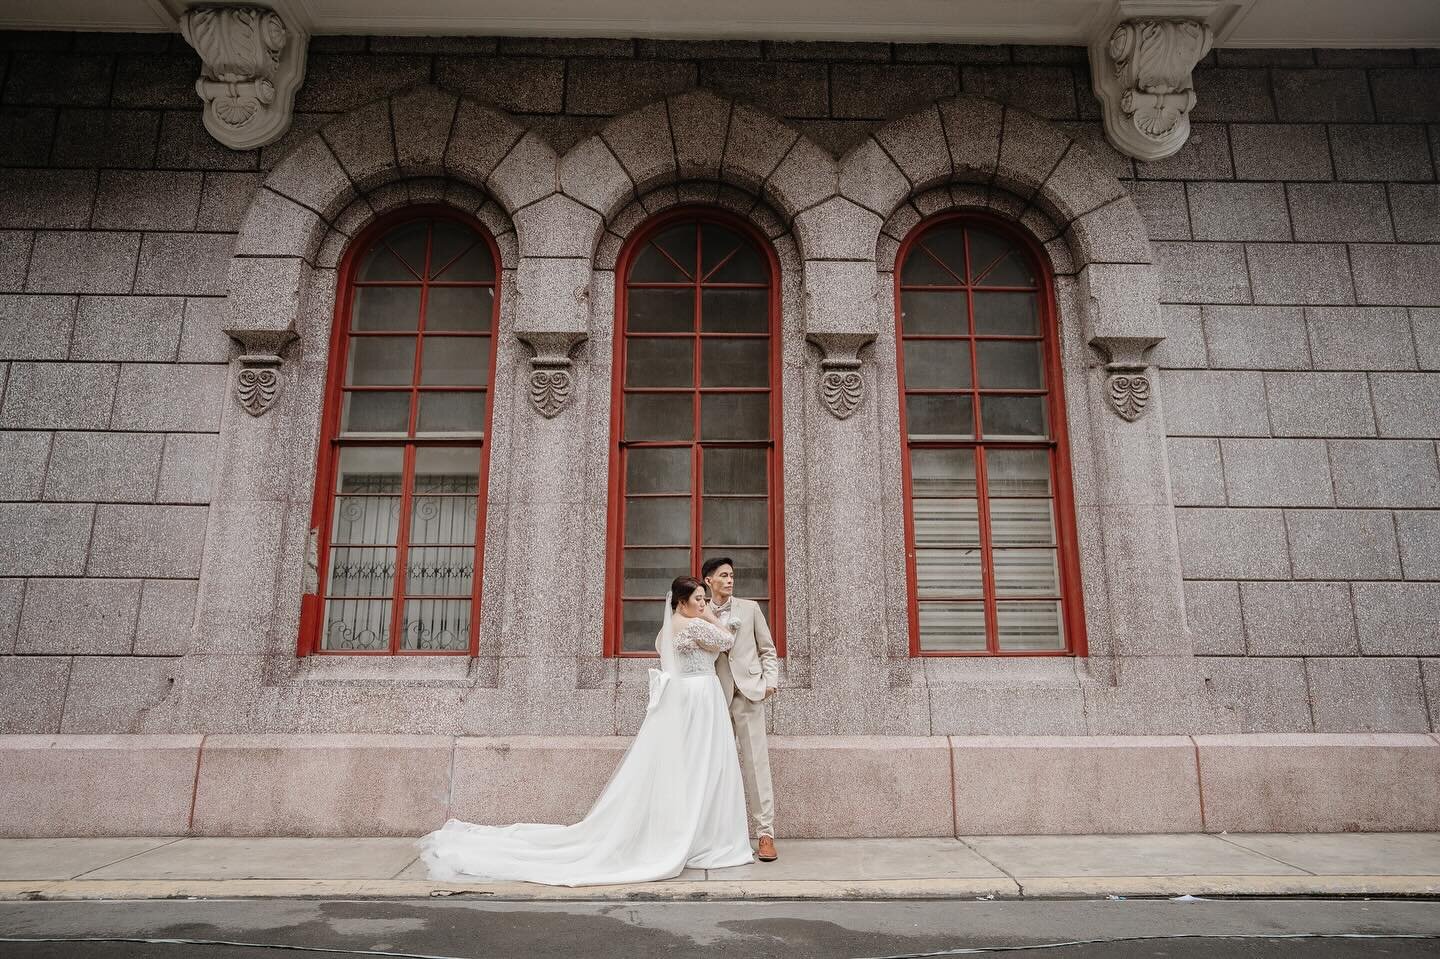 A special moment for Mico &amp; Macy ✨

CEREMONY VENUE | San Agustin Church
PHOTO/VIDEO | @honeycombphotocinema
HMUA | @dianasantos.makeup
GOWN &amp; SUIT | @trajedeboda

#eventsbytr #weddingsph #eventsph #weddings #weddingplannerph #weddingplanners 